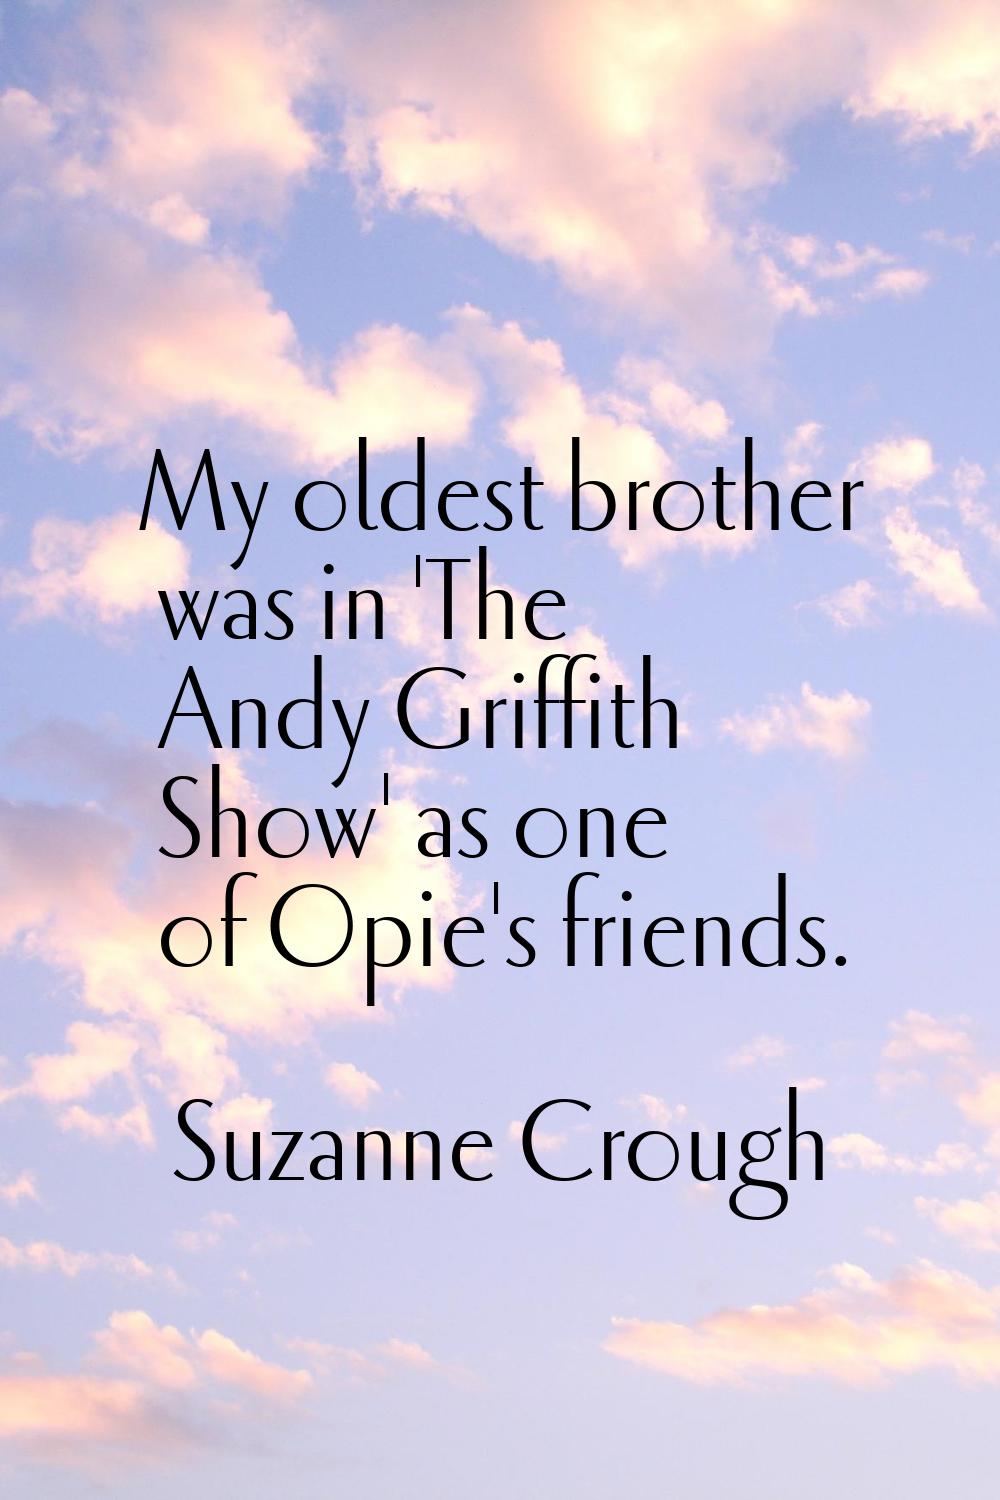 My oldest brother was in 'The Andy Griffith Show' as one of Opie's friends.